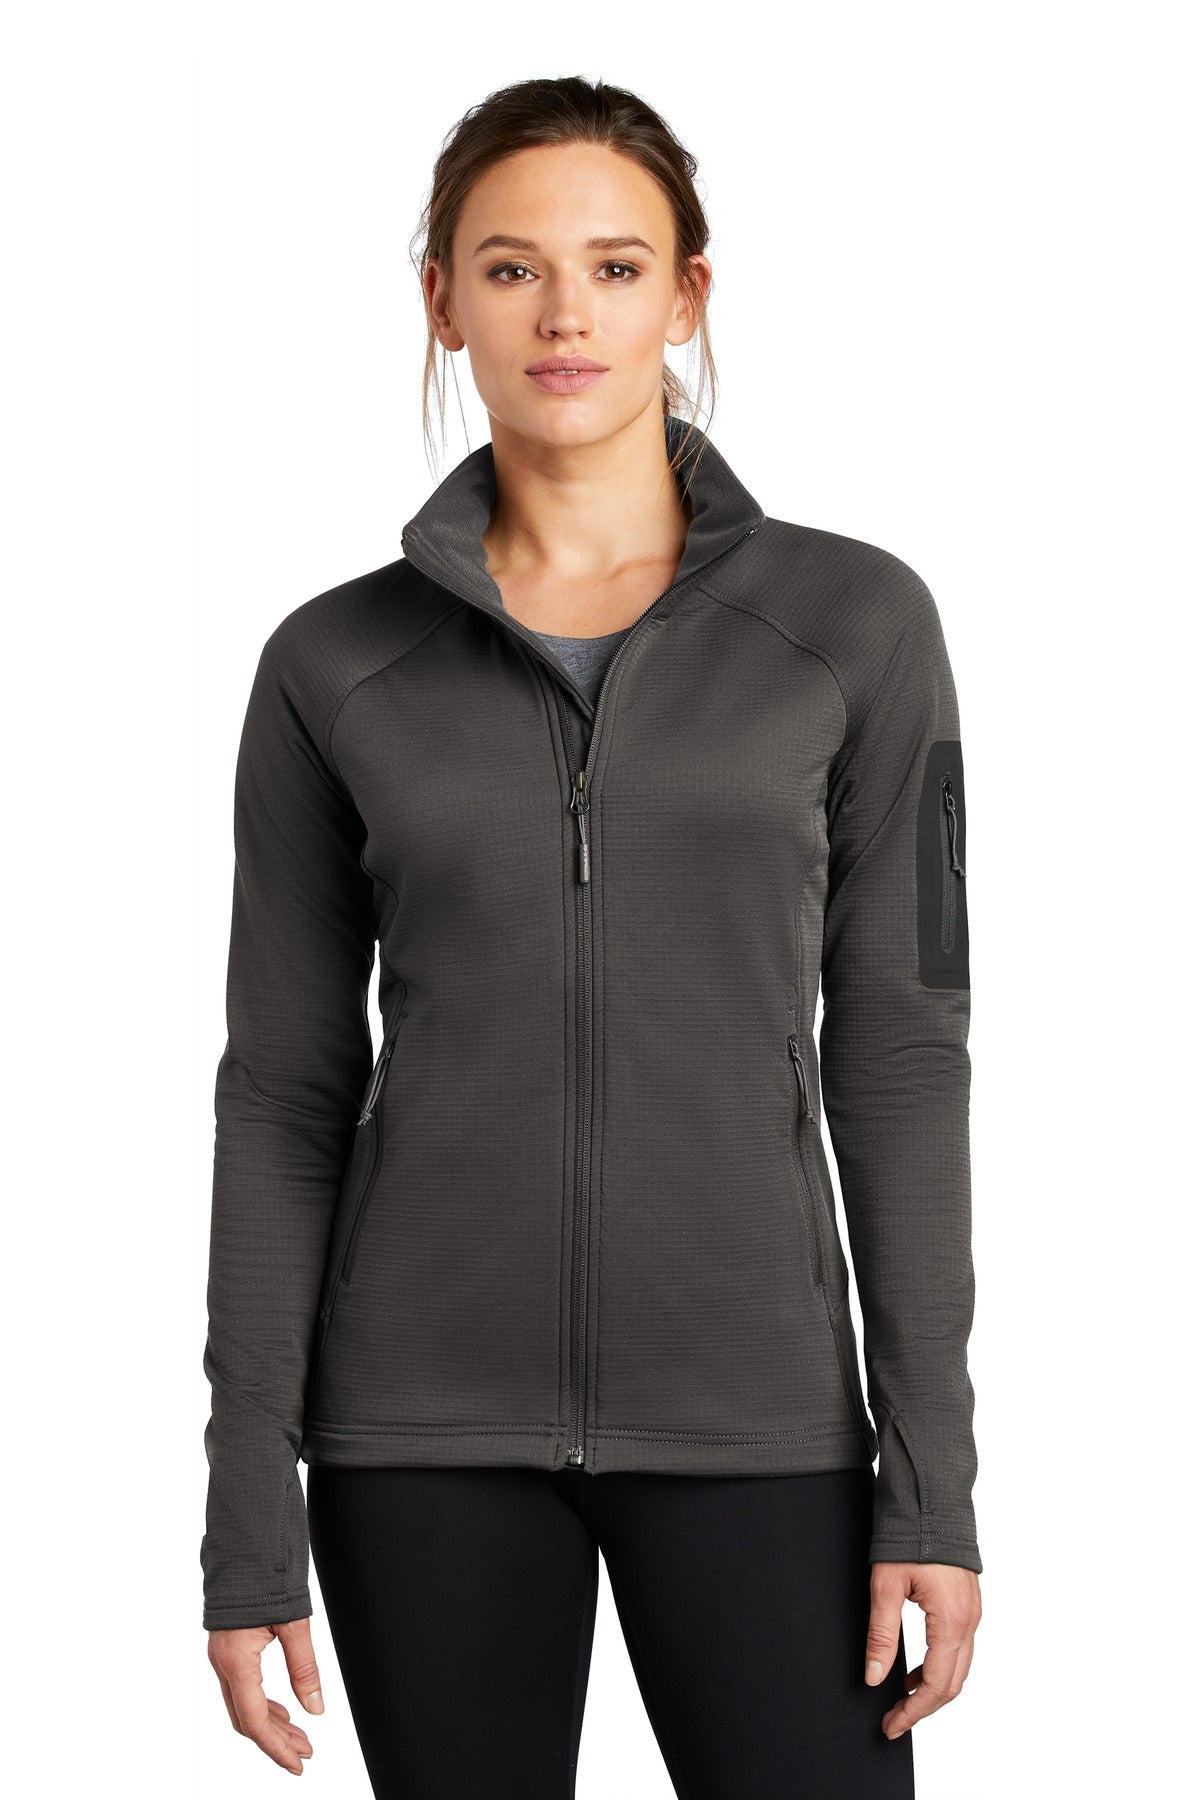 The North Face ® Ladies Mountain Peaks Full-Zip Fleece Jacket NF0A47FE - DFW Impression